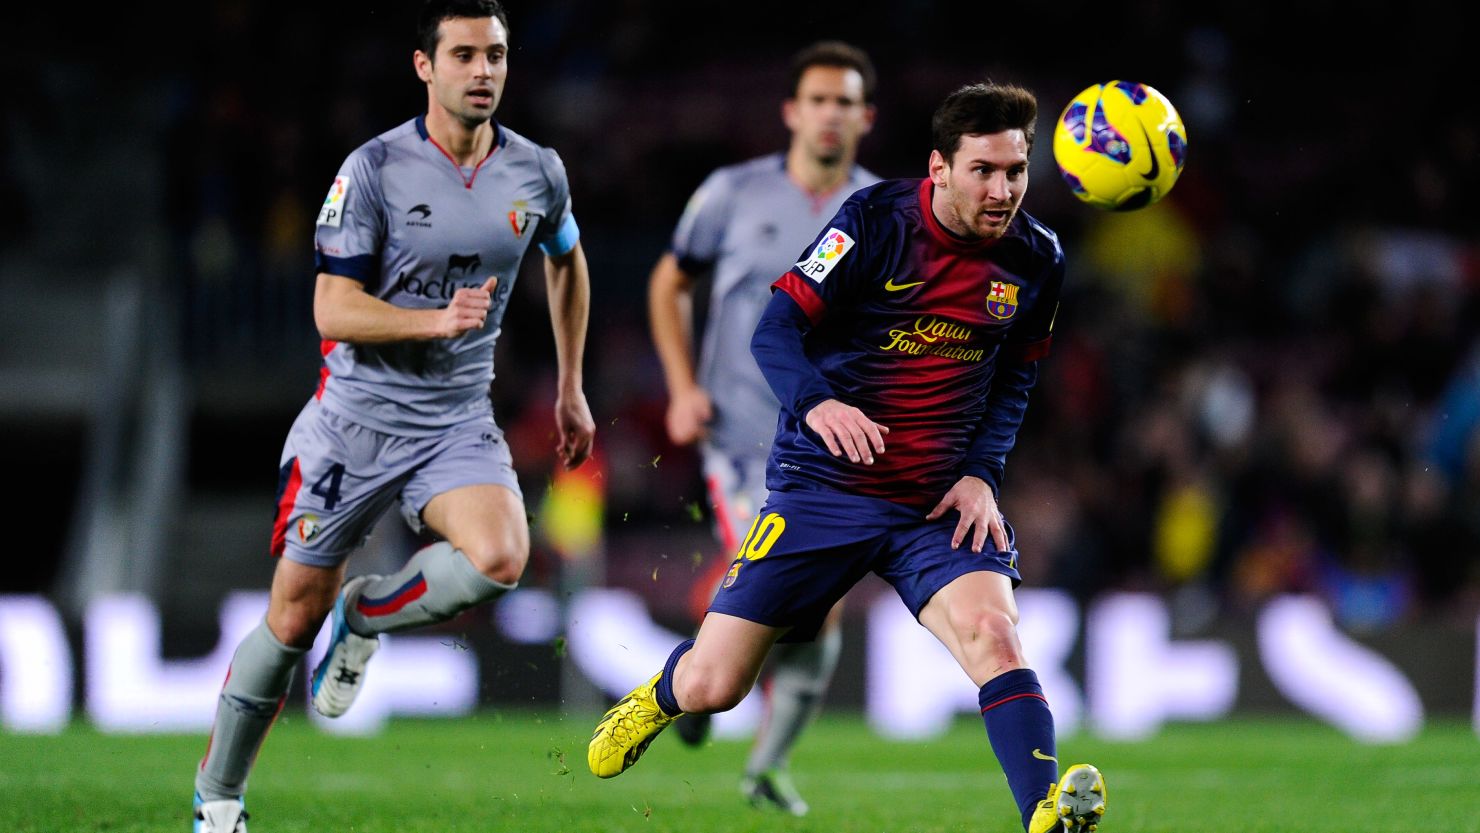 Leo Messi scored four as Barcelona cruised to a 5-1 win over Osasuna at Camp Nou Sunday.